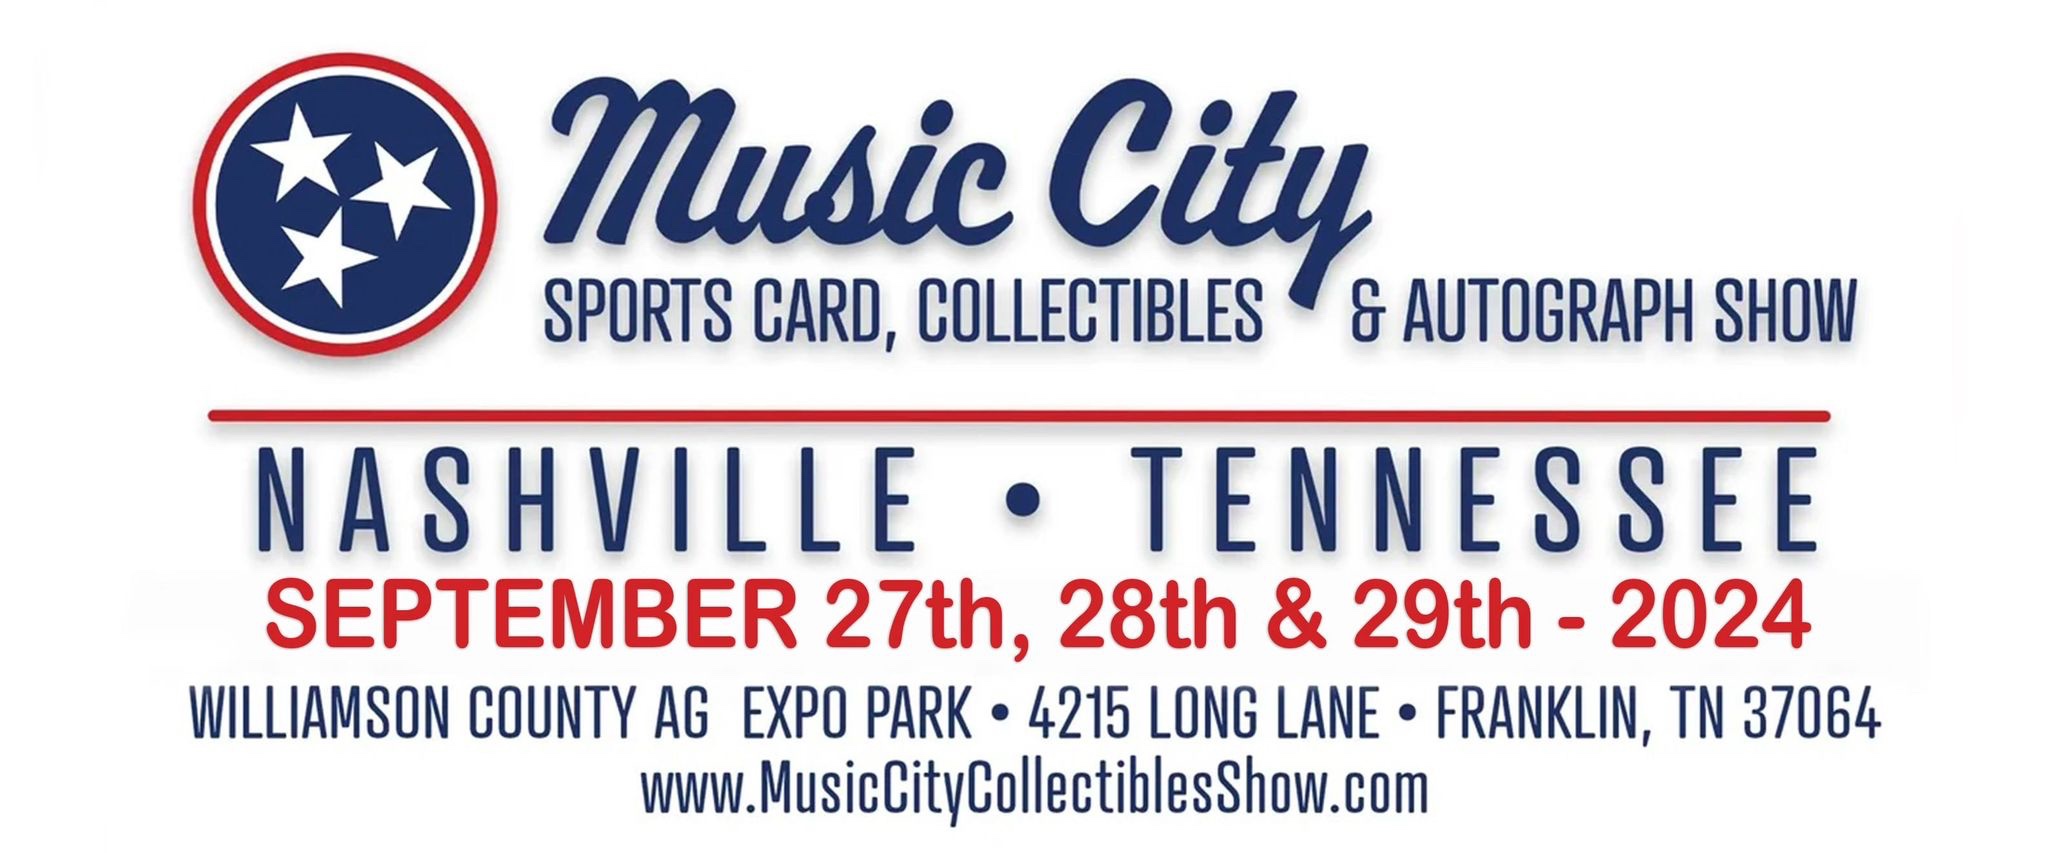 Music City Sports Card, Collectibles & Autograph Show Nashville, Tennessee.